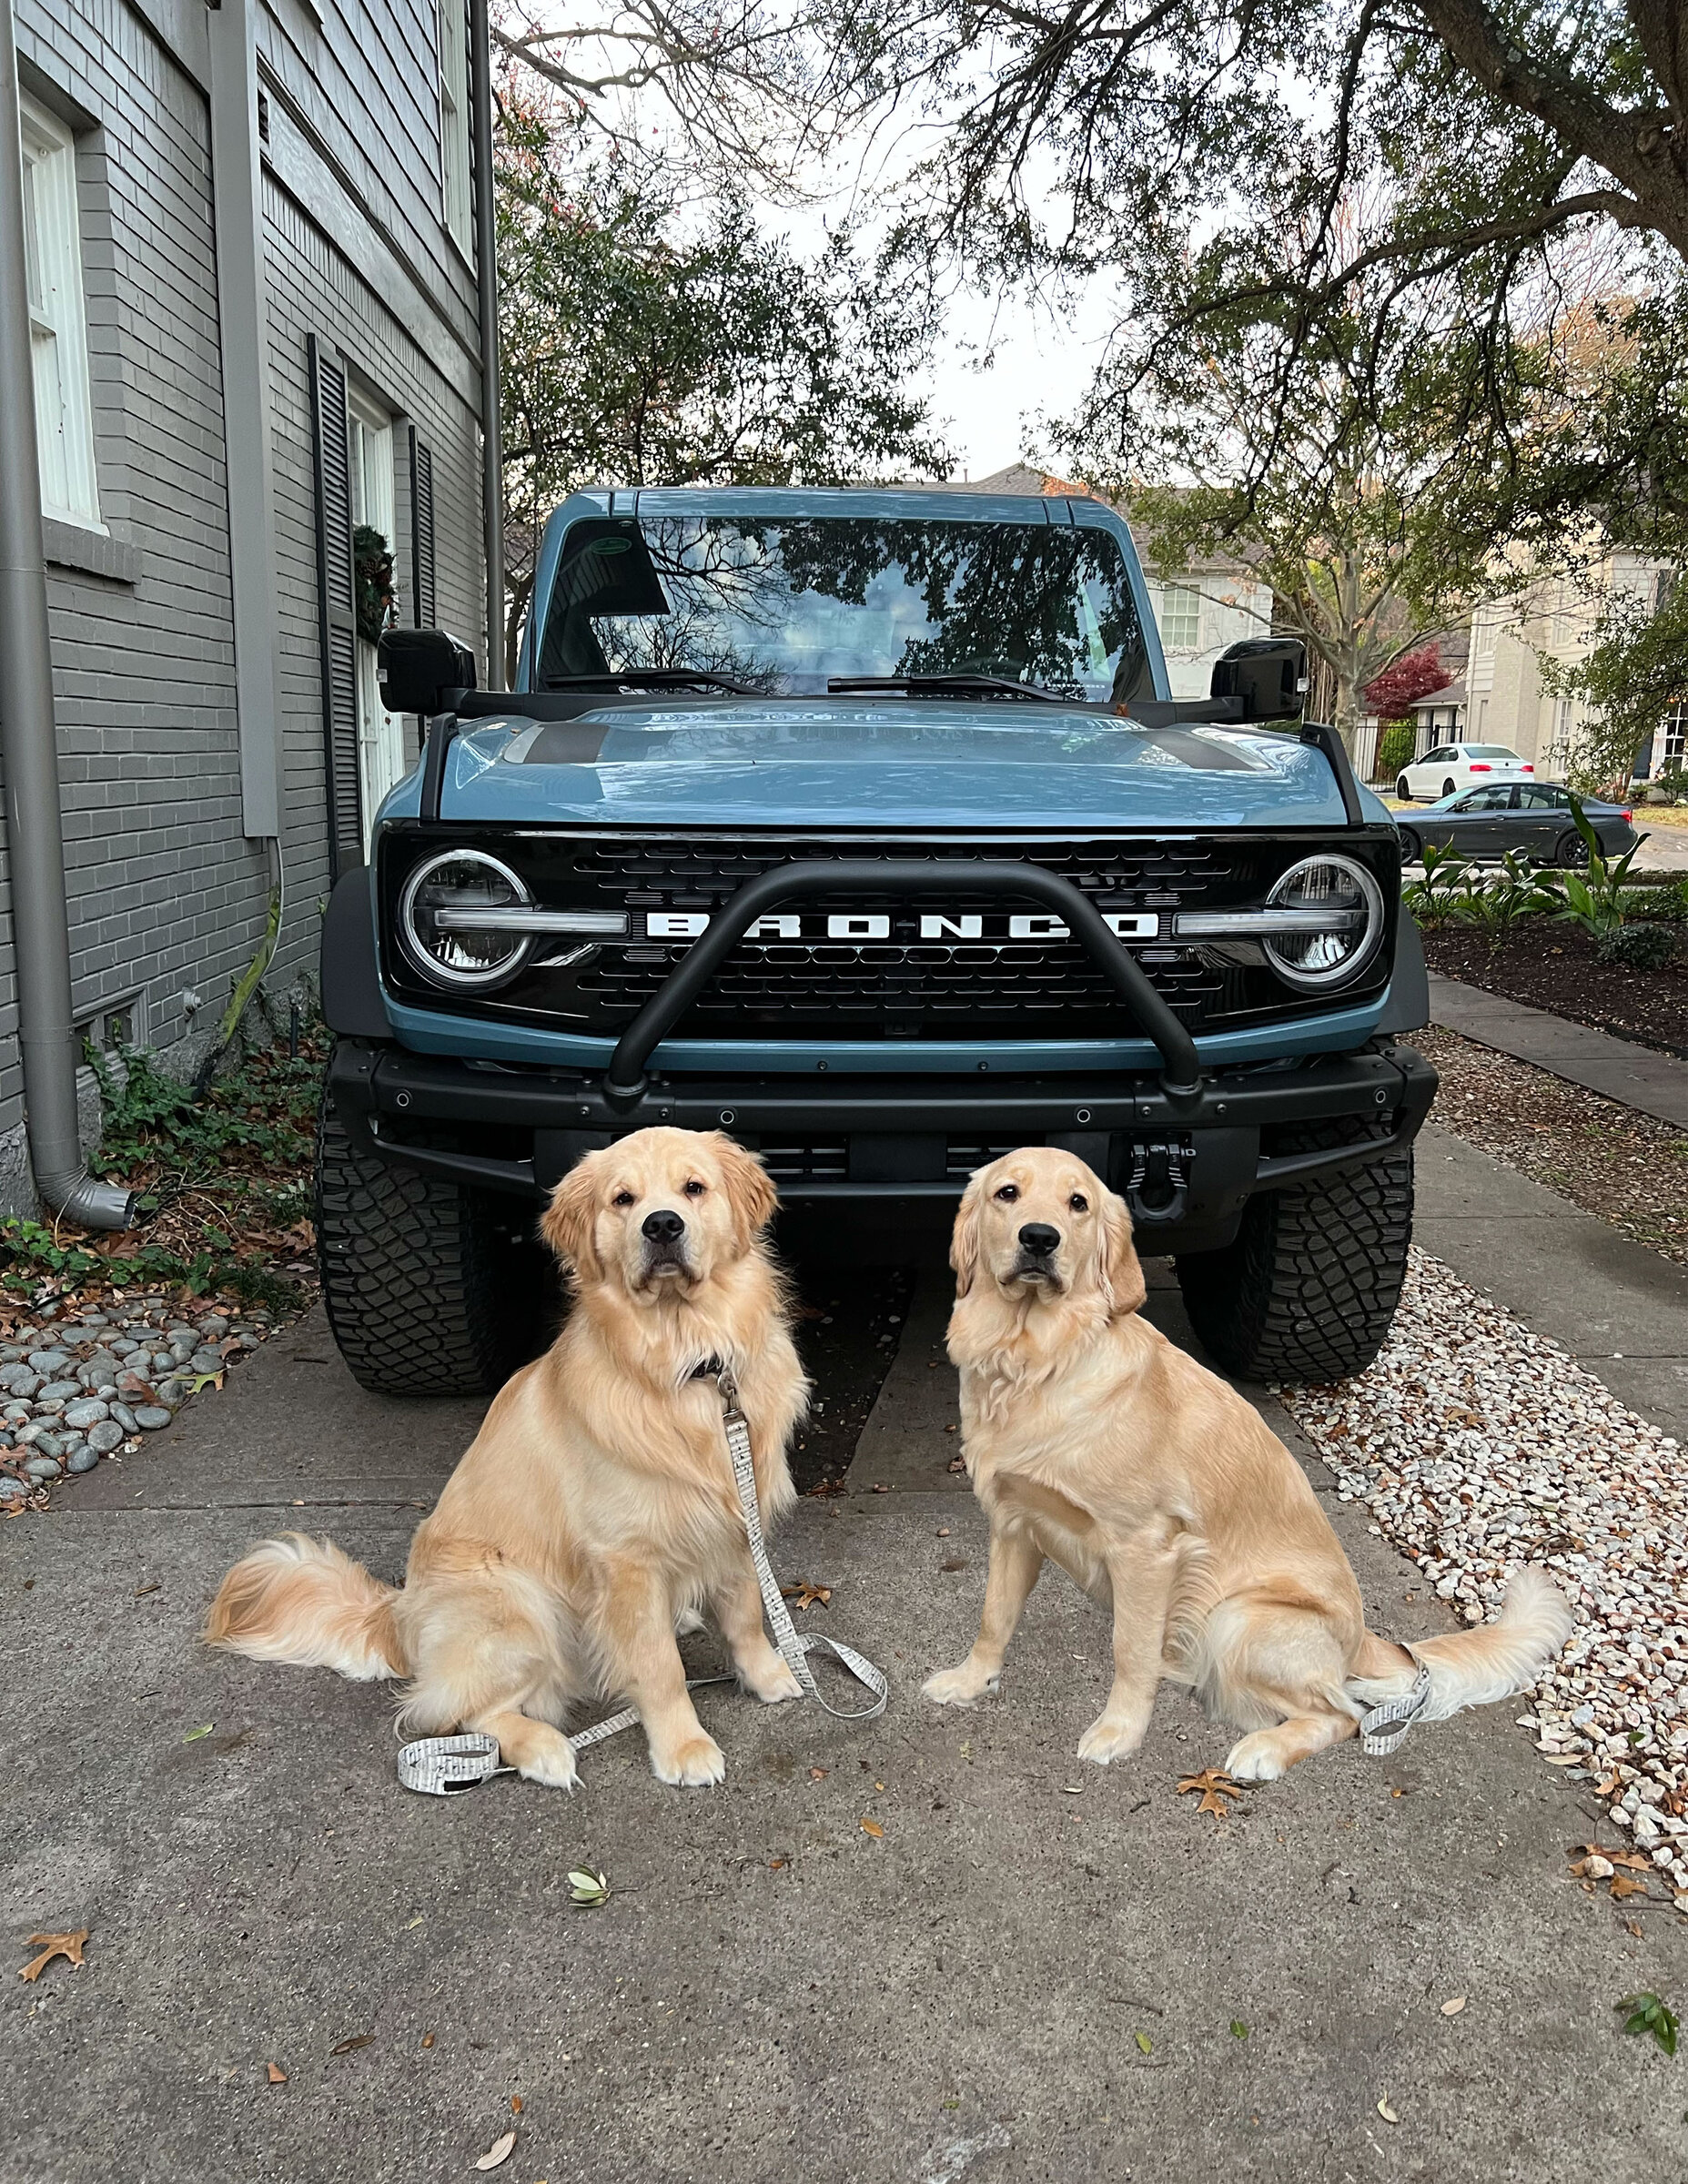 Ford Bronco Soft tops, Hard tops and Golden Retrievers. maya and murph